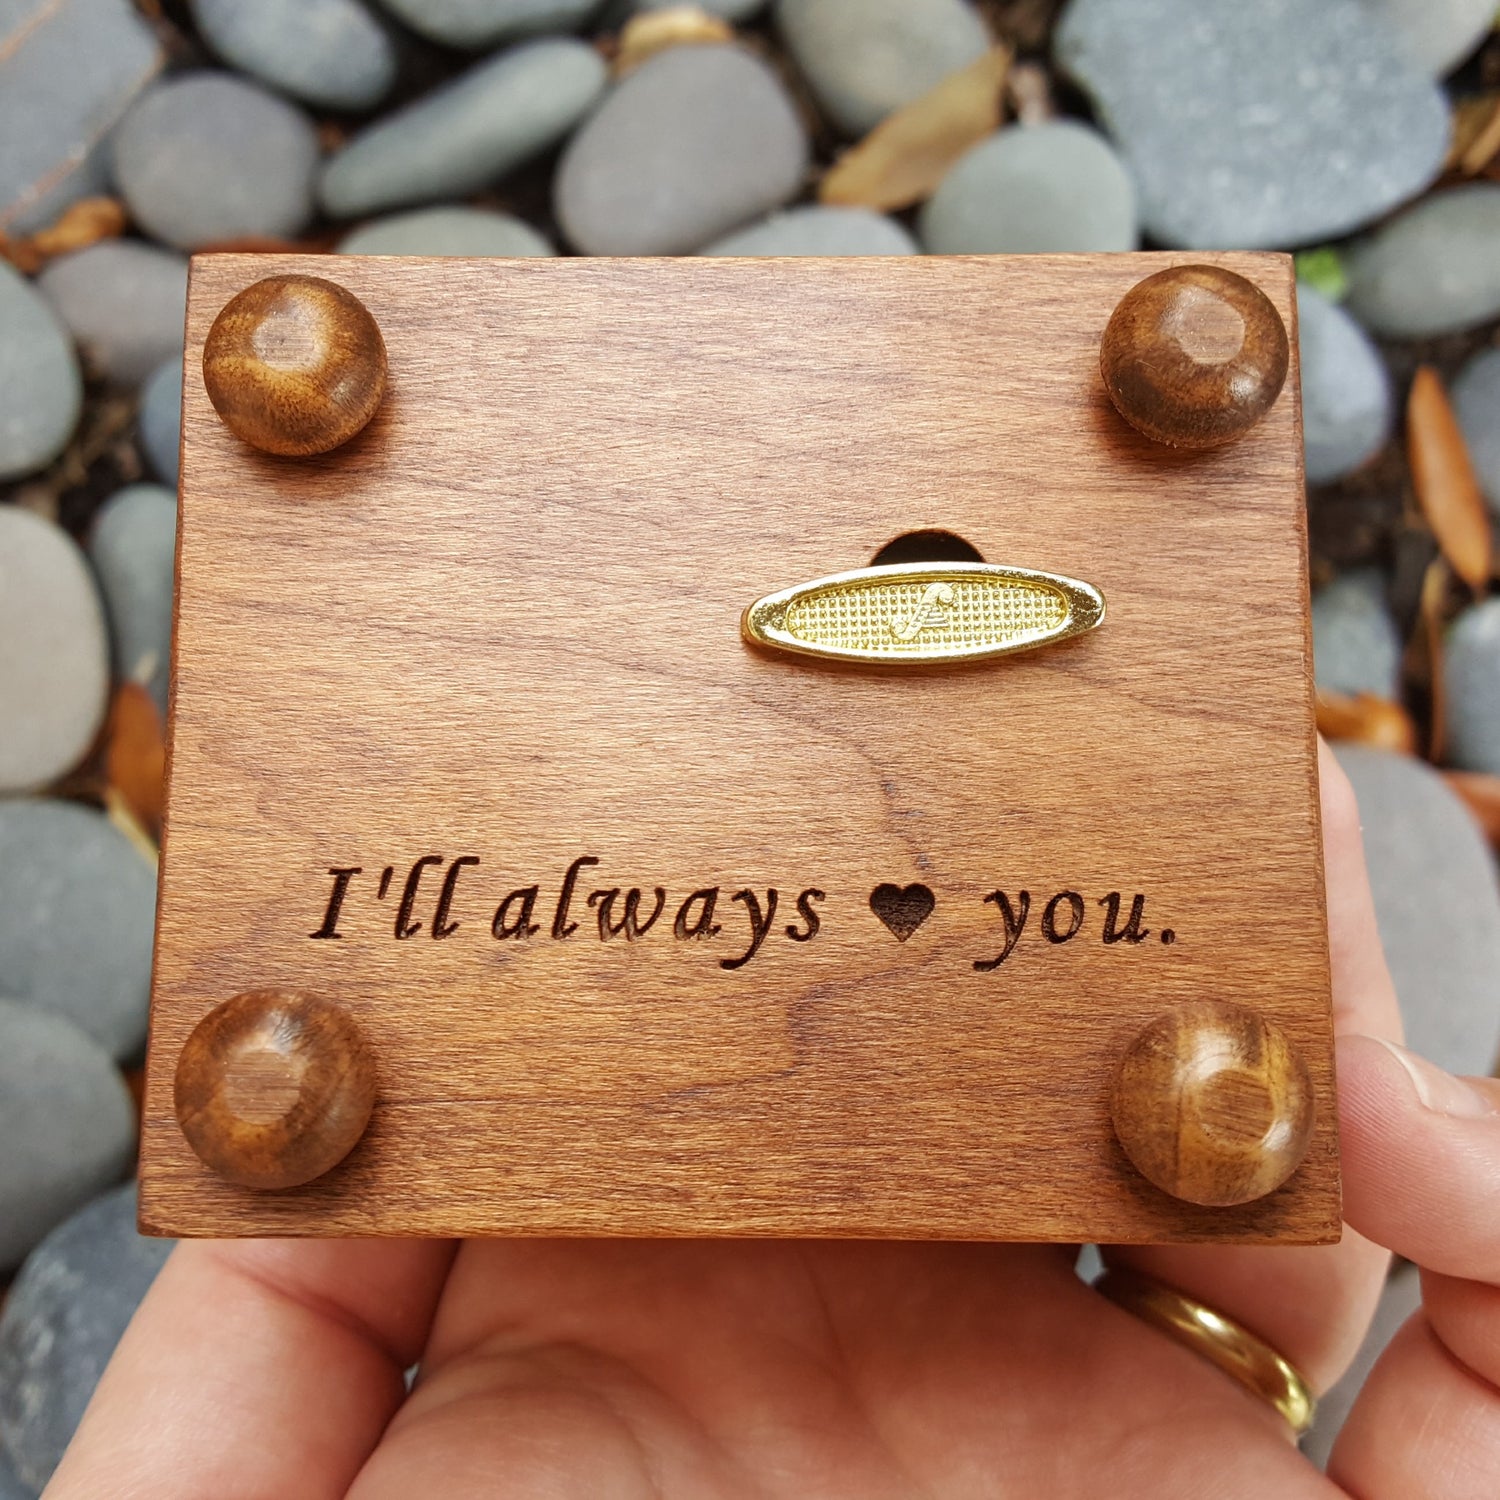 I'll always love you engraving on the bottom side of the music box